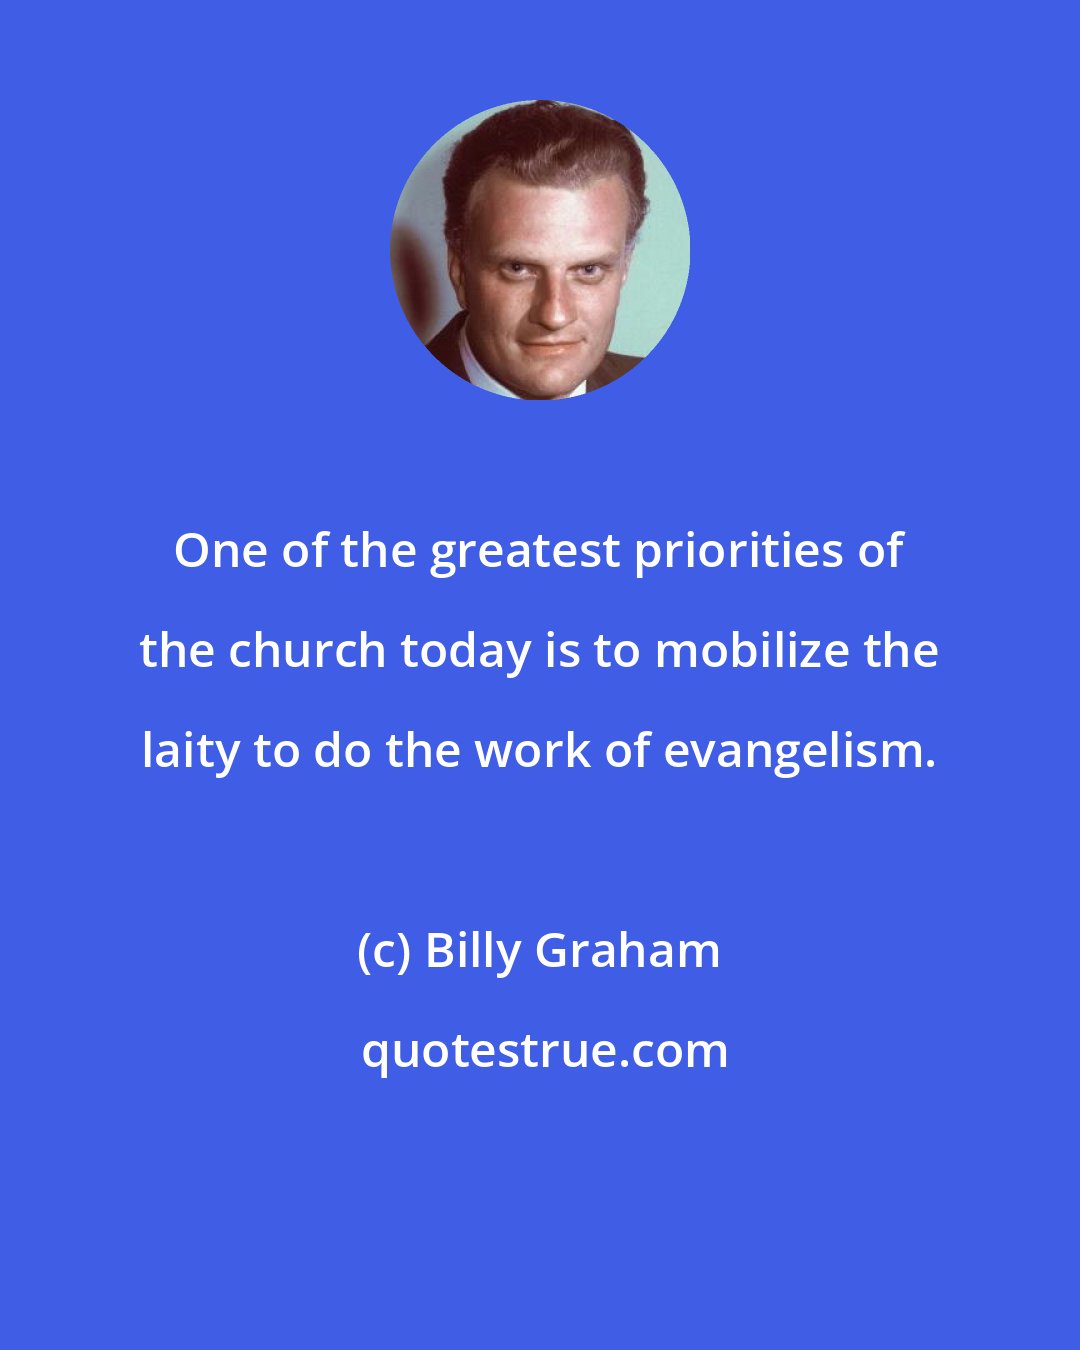 Billy Graham: One of the greatest priorities of the church today is to mobilize the laity to do the work of evangelism.